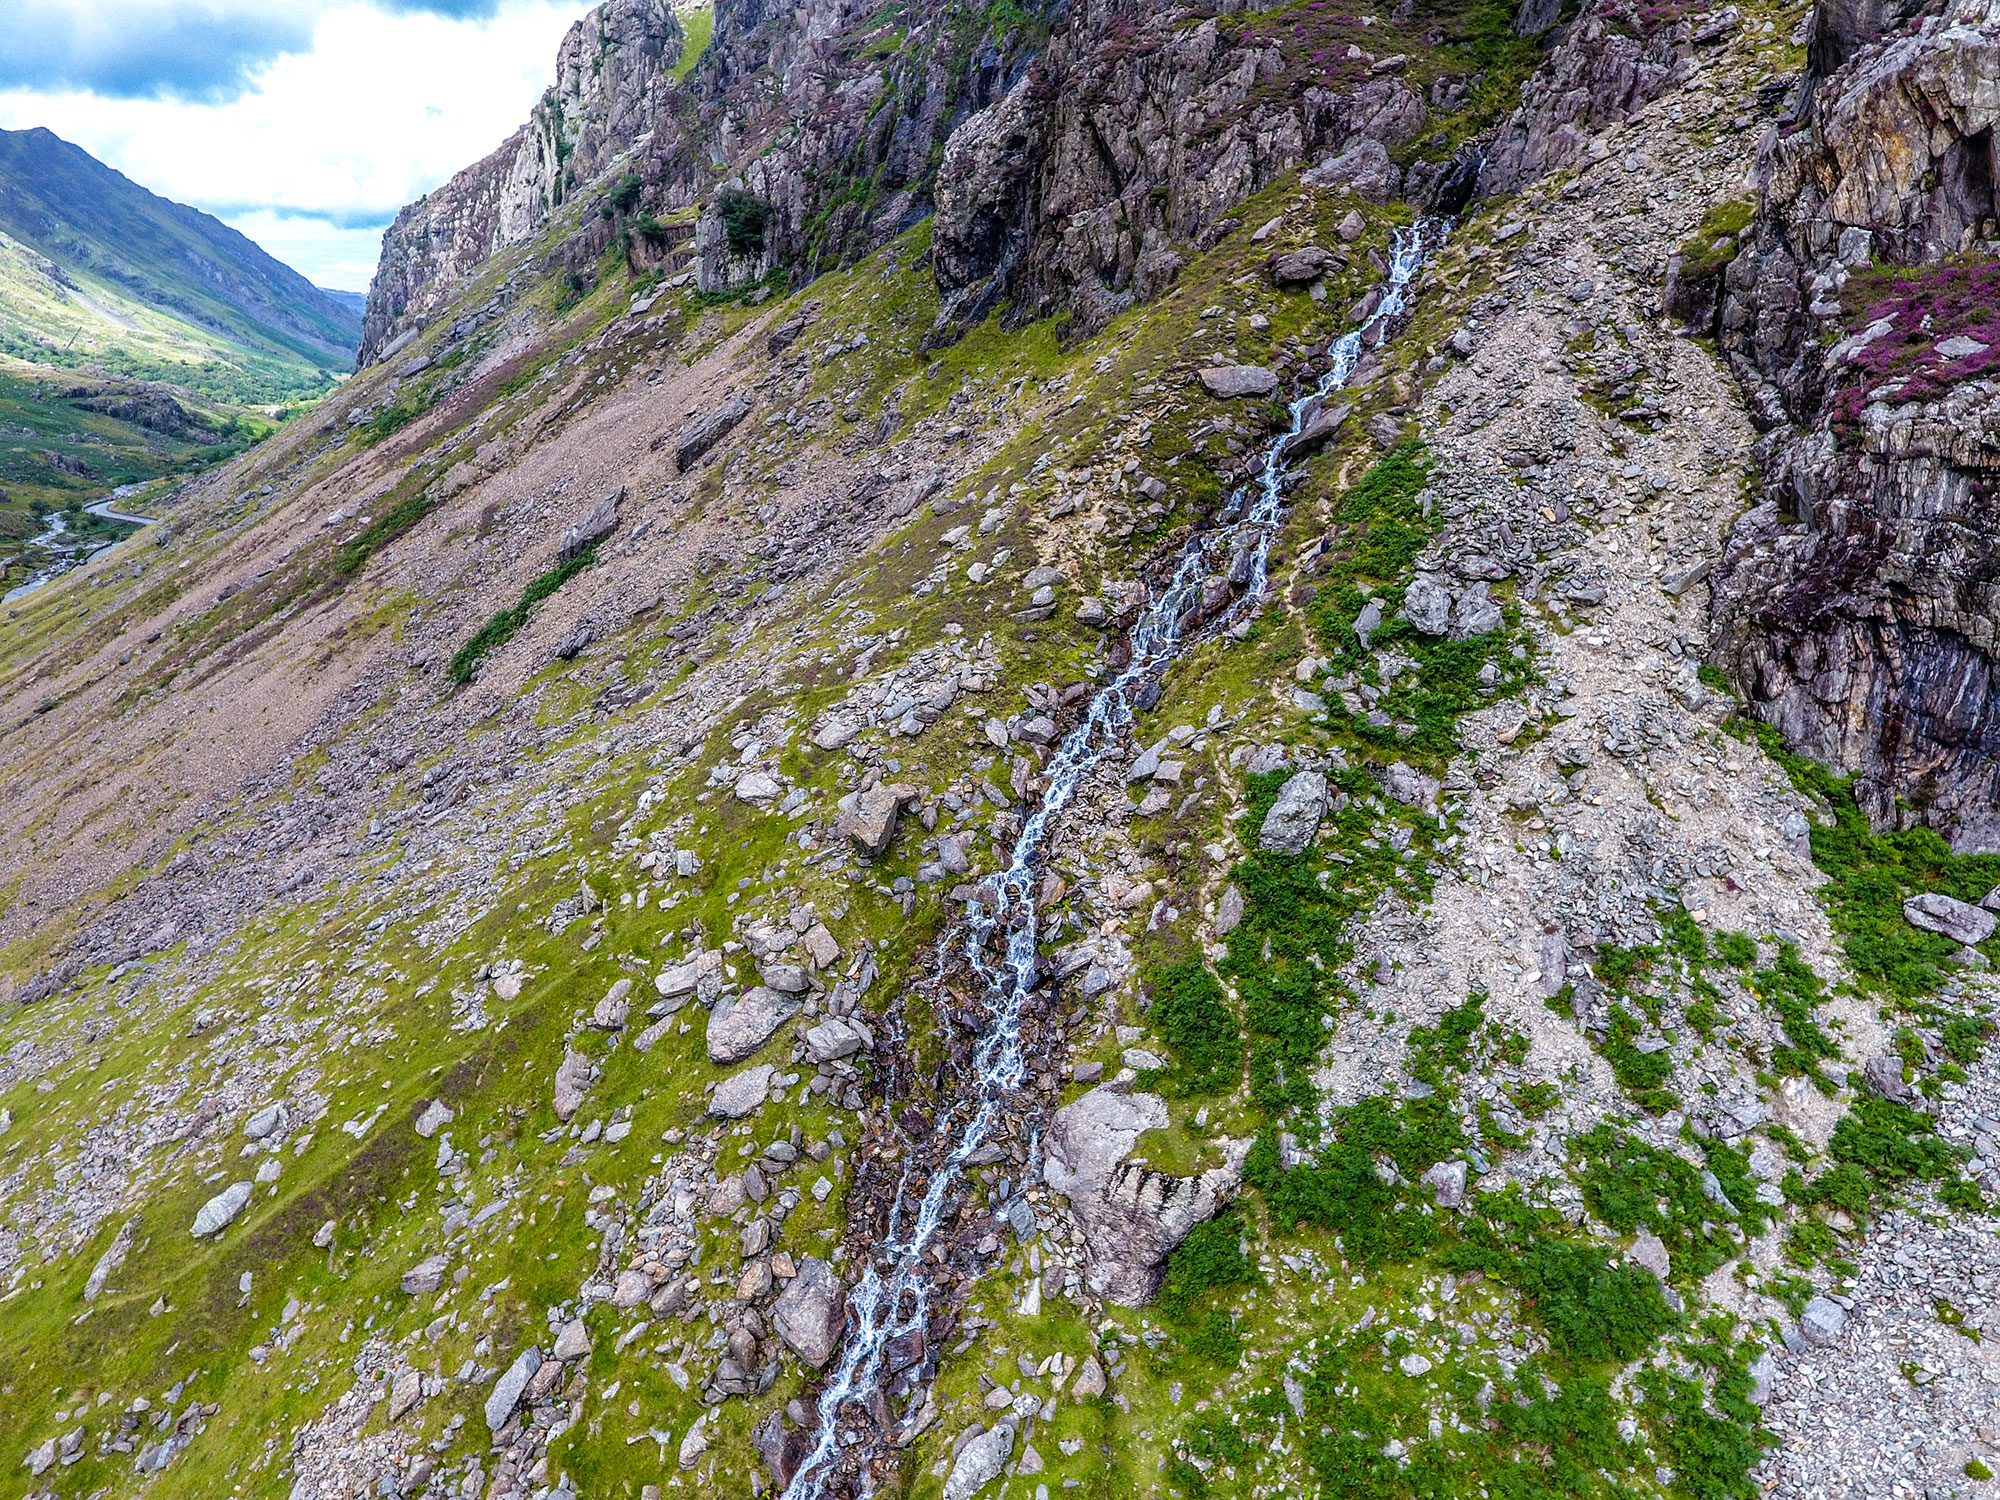 Waterfall flowing down a mountain in Snowdonia National Park, Wales